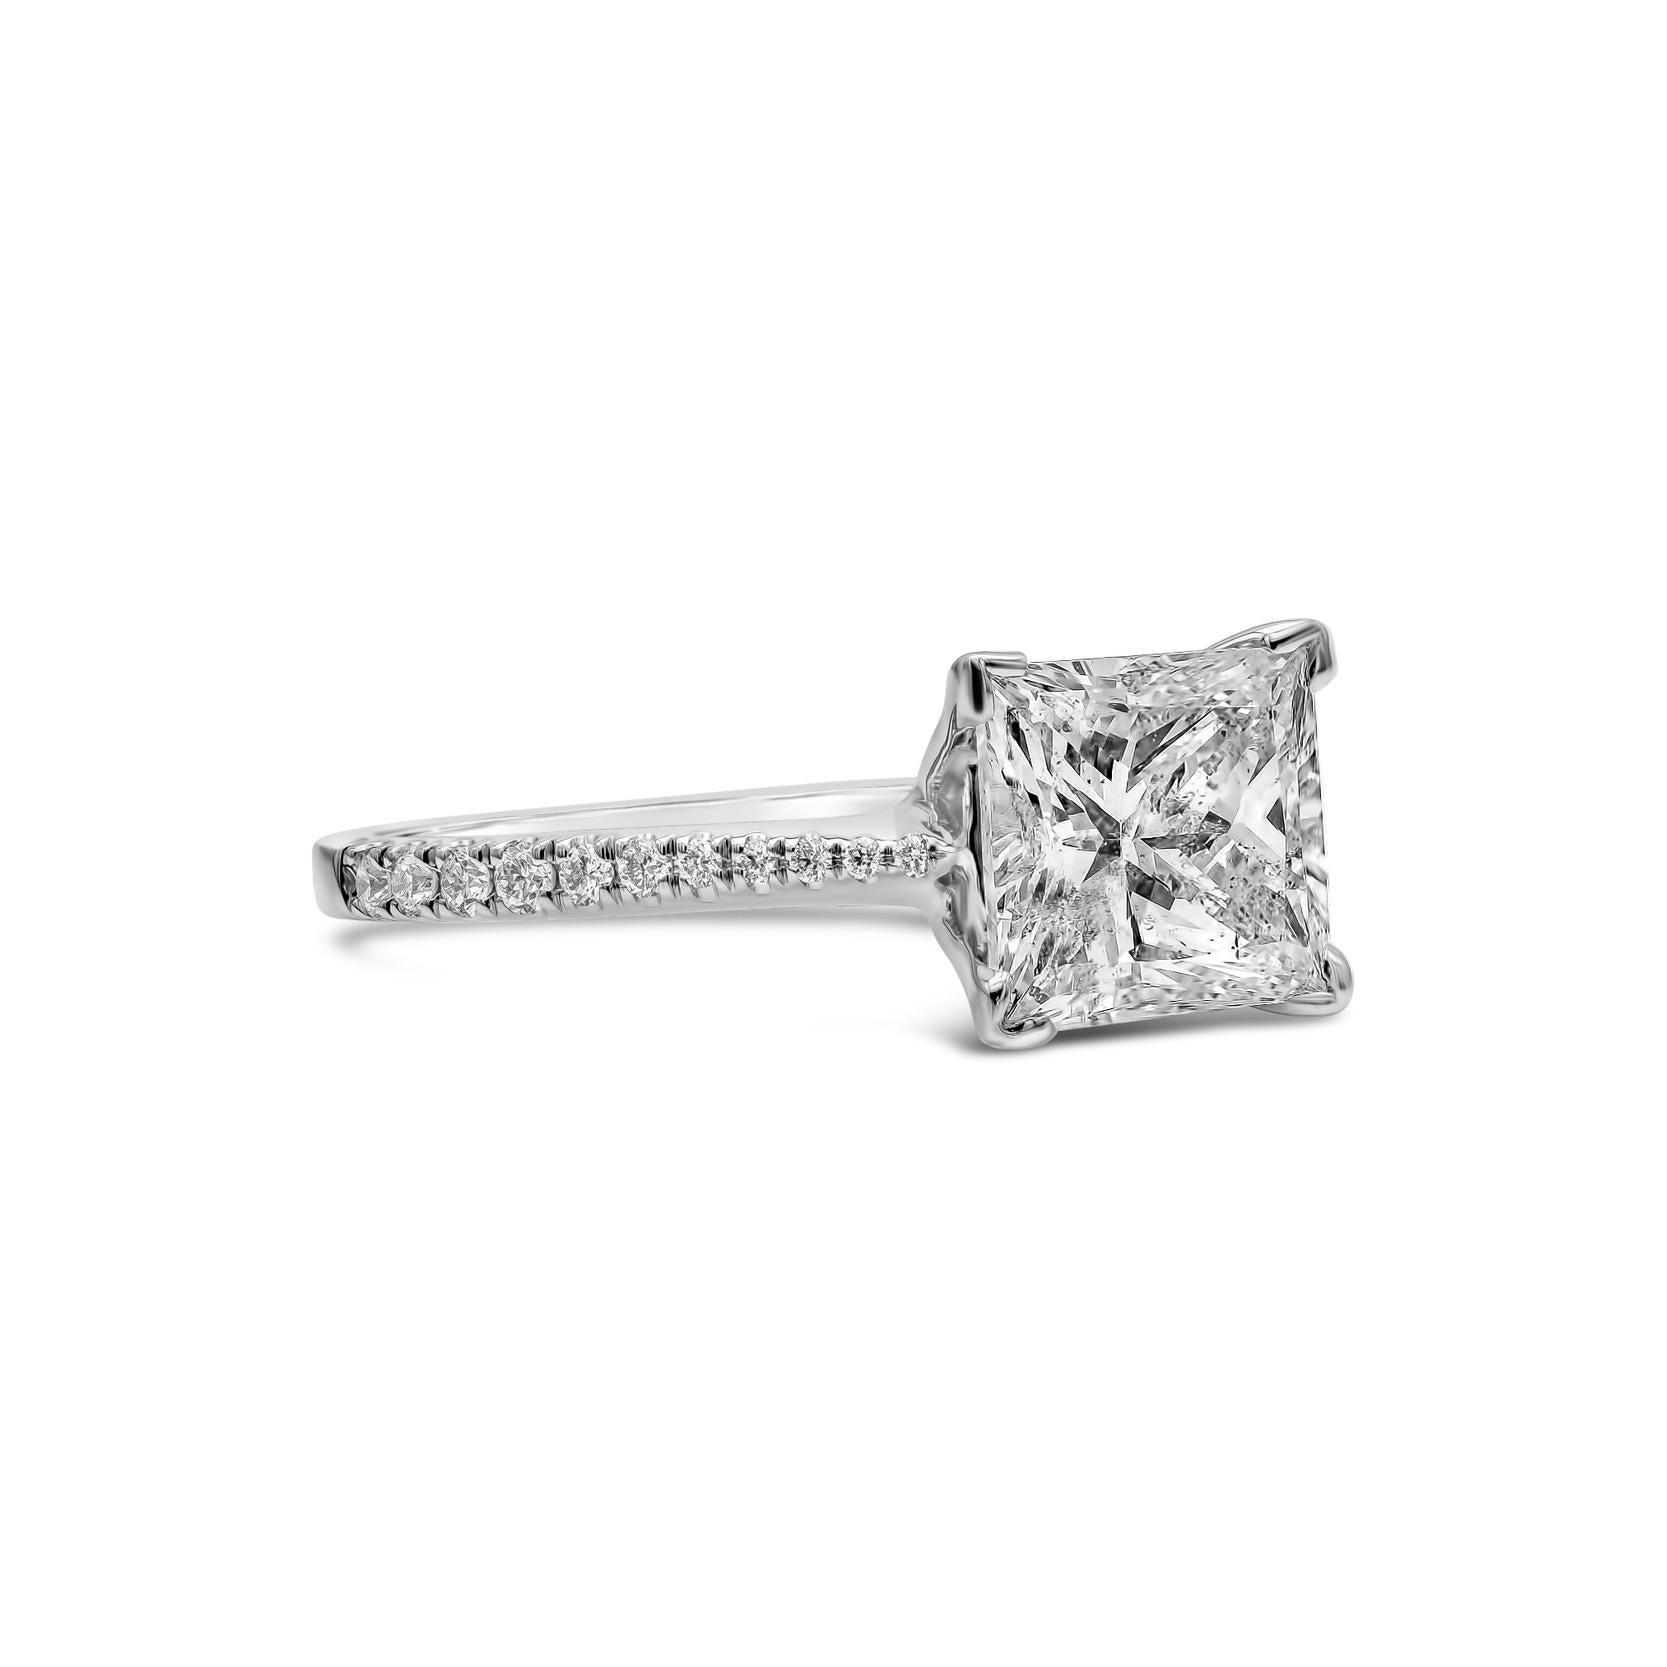 A classic and timeless diamond engagement ring showcasing a 2.03 carats princess cut diamond, beautifully set in a diamond encrusted shank mounting made in 18k white gold. Center diamond is approximately G color, SI3 in clarity. Accent diamonds